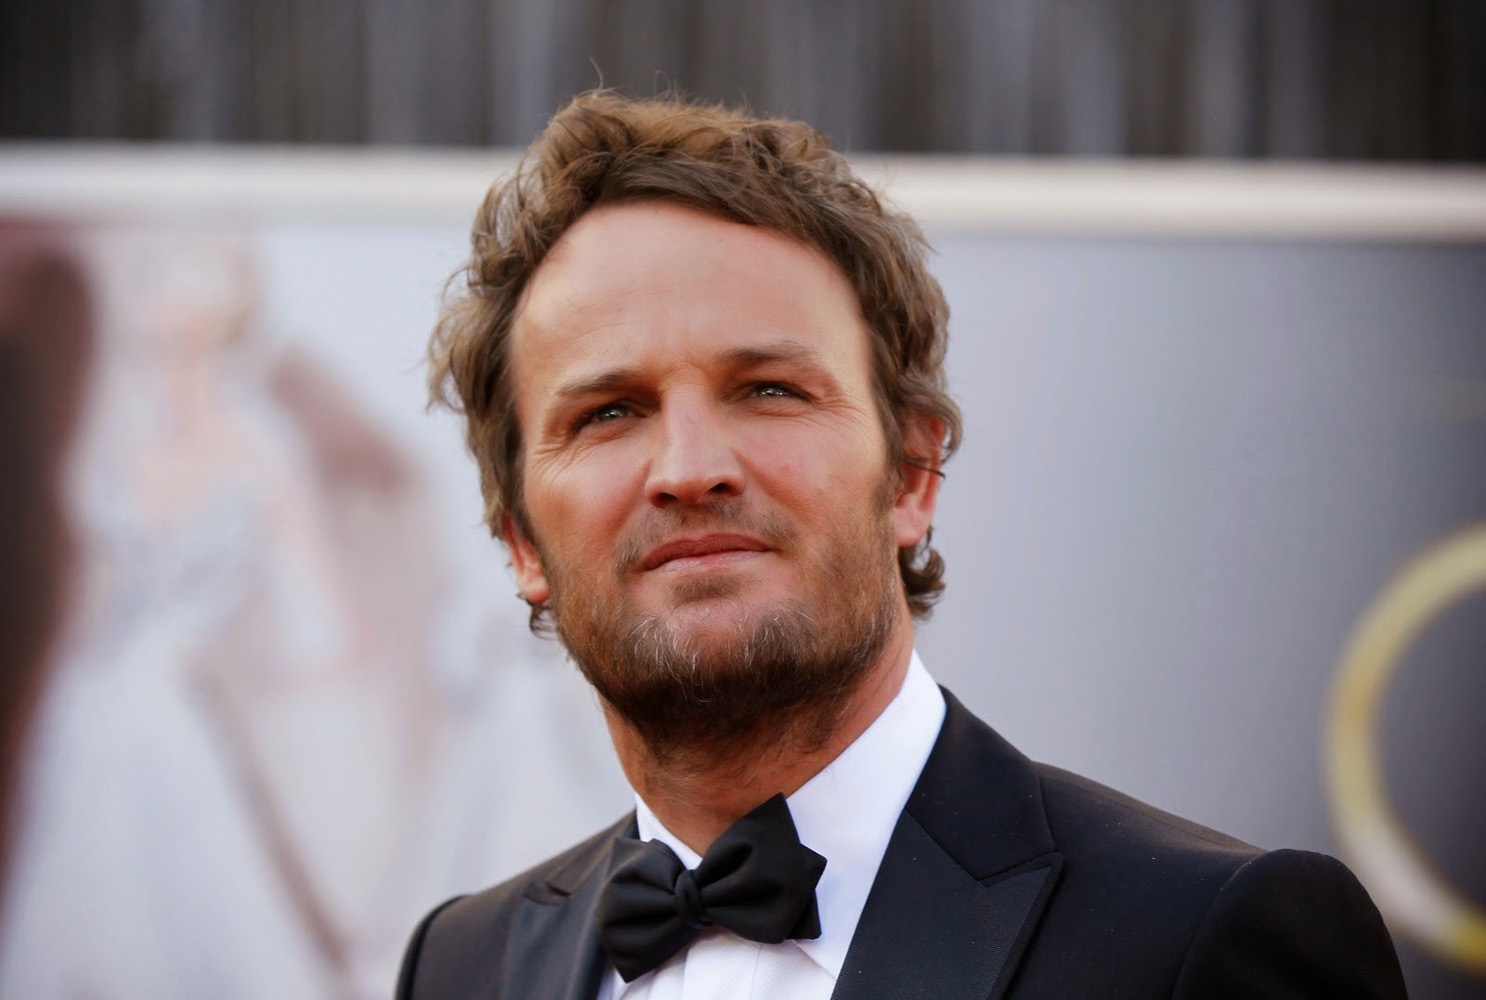 Jason Clarke, hair styled by Nathan Sager.